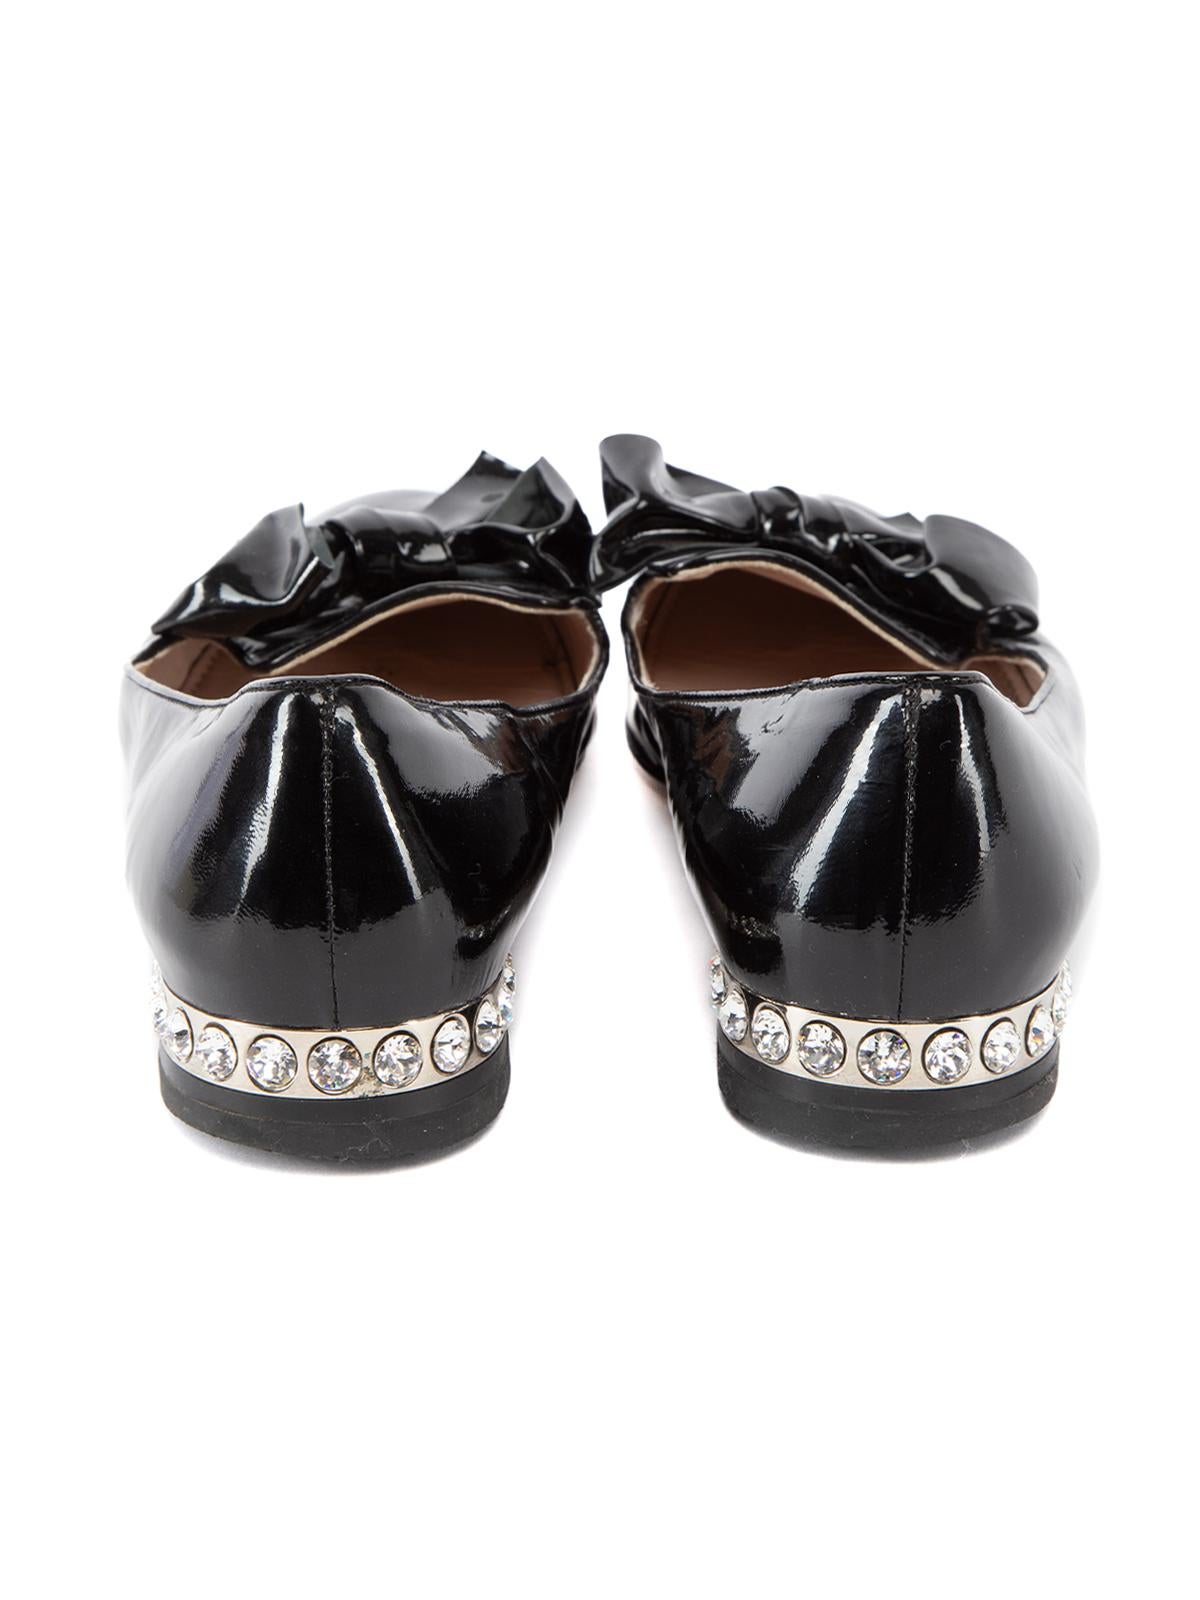 Pre-Loved Miu Miu Women's Patent Leather Bow Flats In Excellent Condition In London, GB